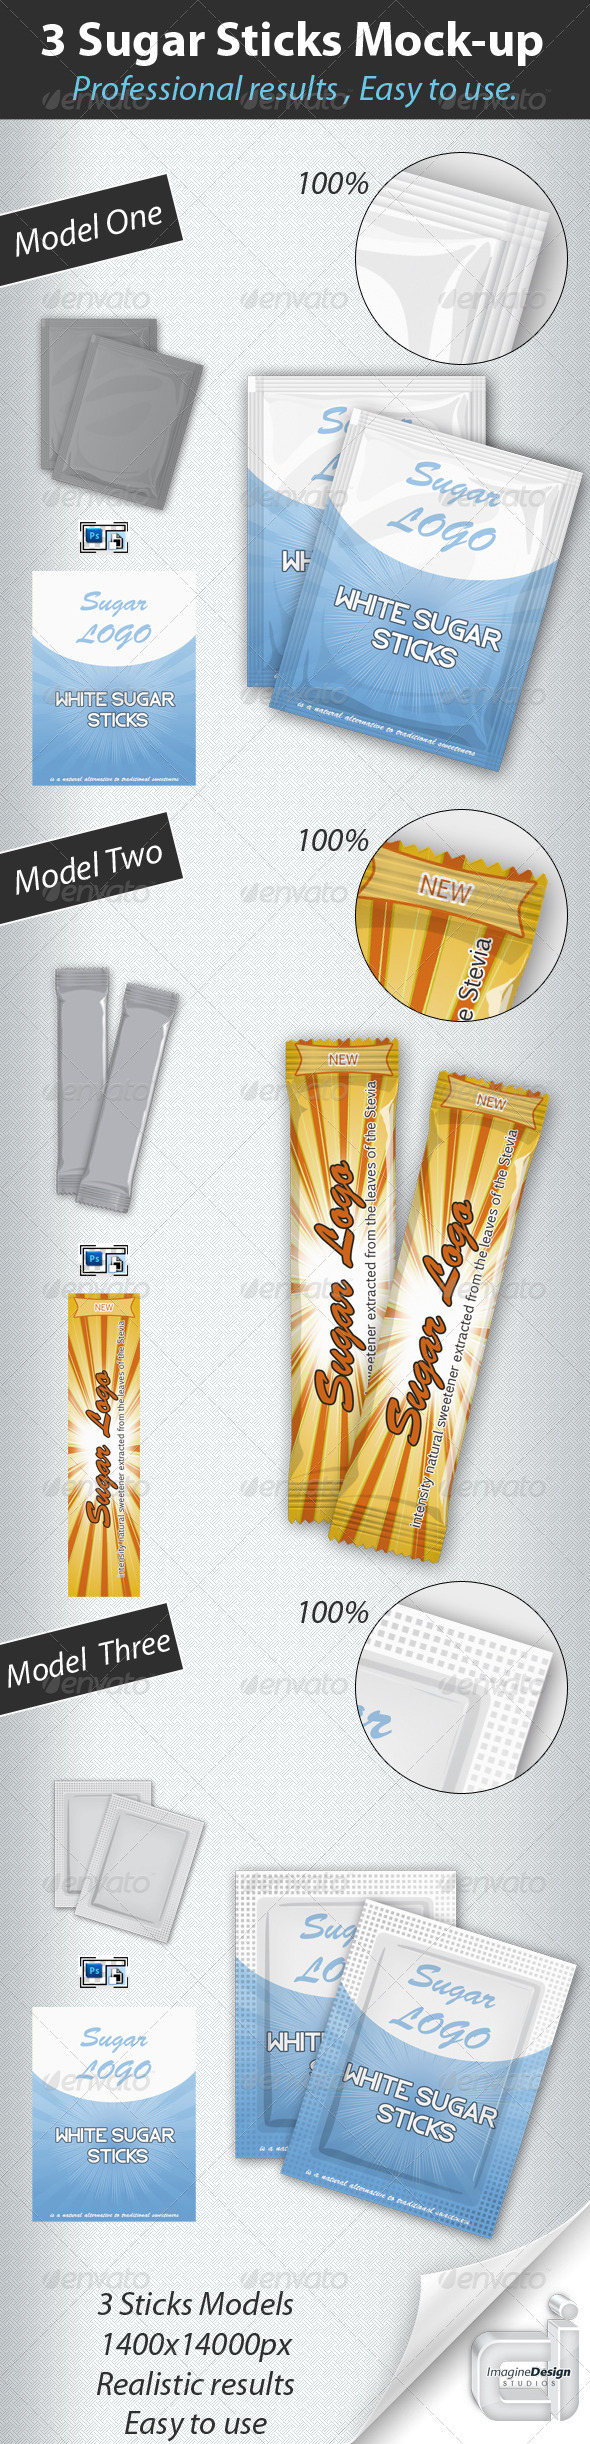 Download Professional 3 Sugar Sticks Mock-up by BaGeRa | GraphicRiver